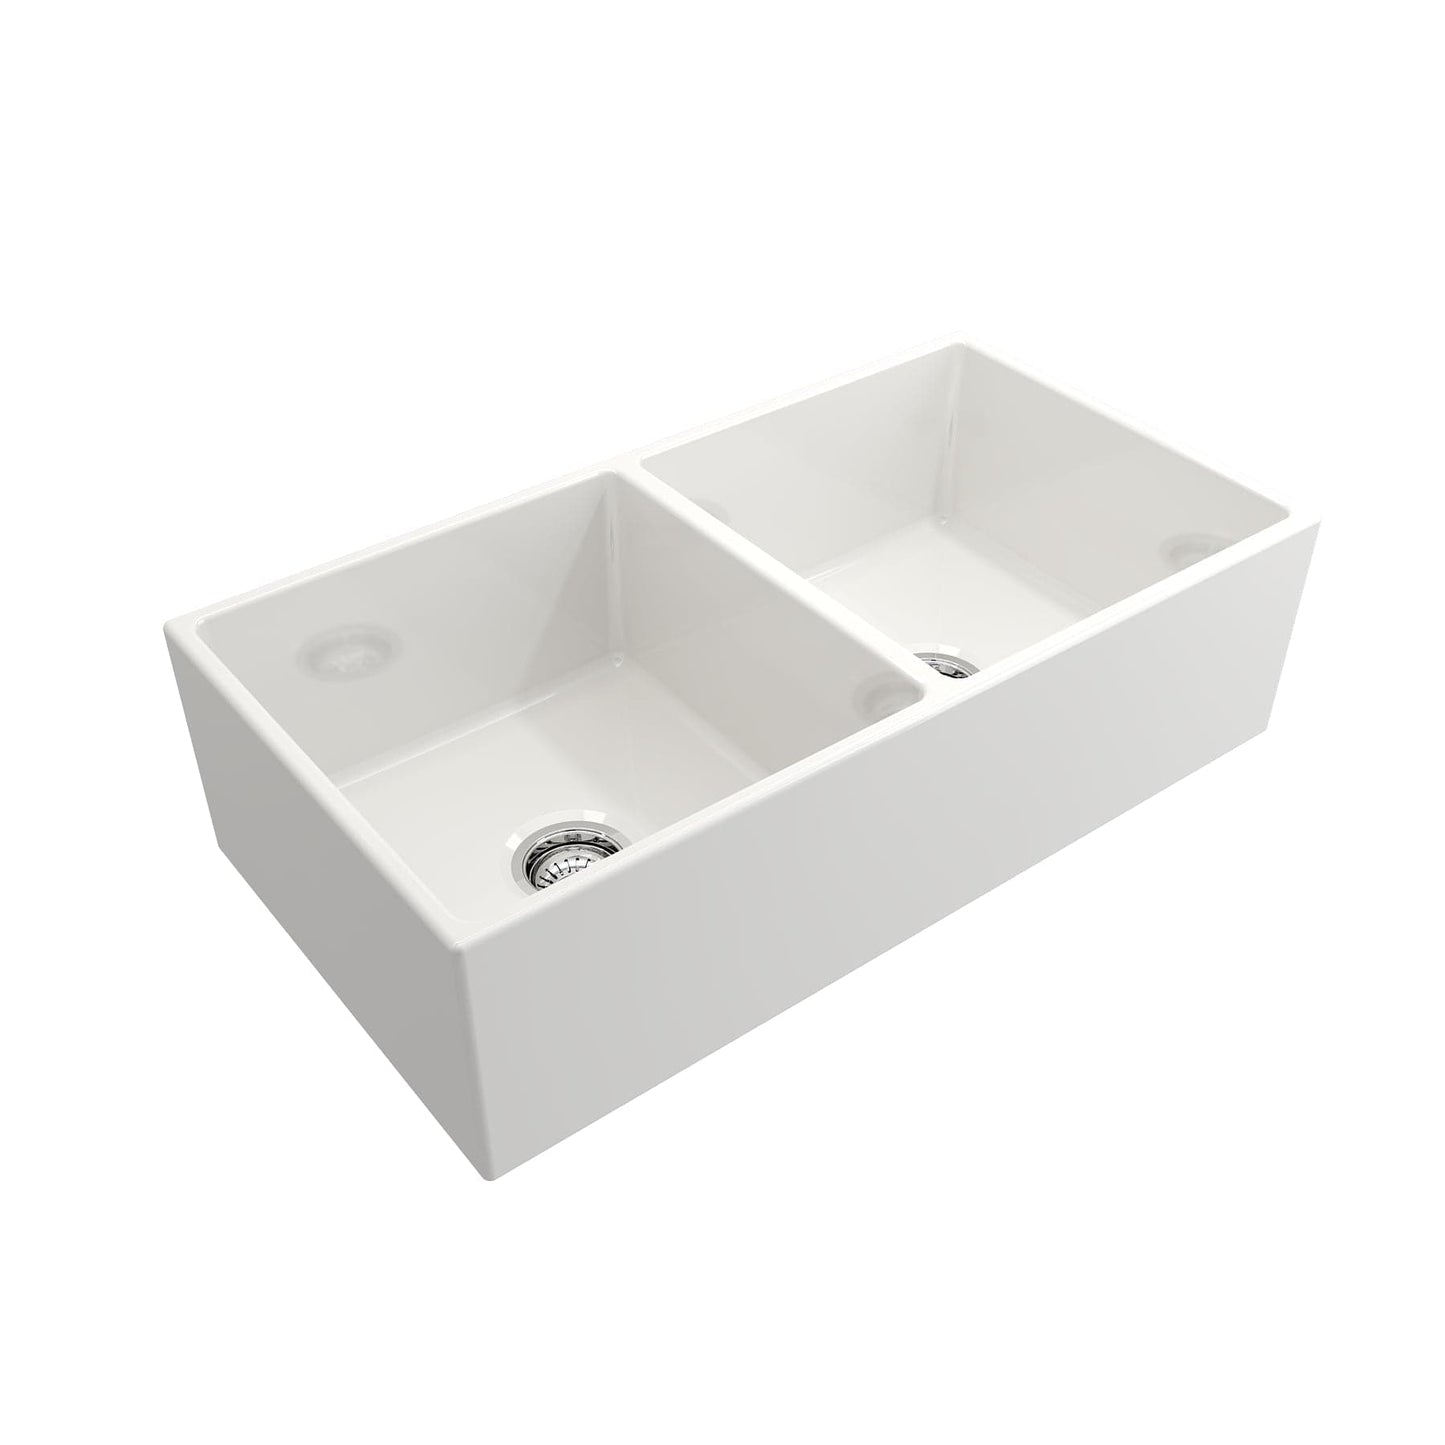 BOCCHI CONTEMPO 36" Fireclay Farmhouse Double Bowl Kitchen Sink with Protective Bottom Grid and Strainer